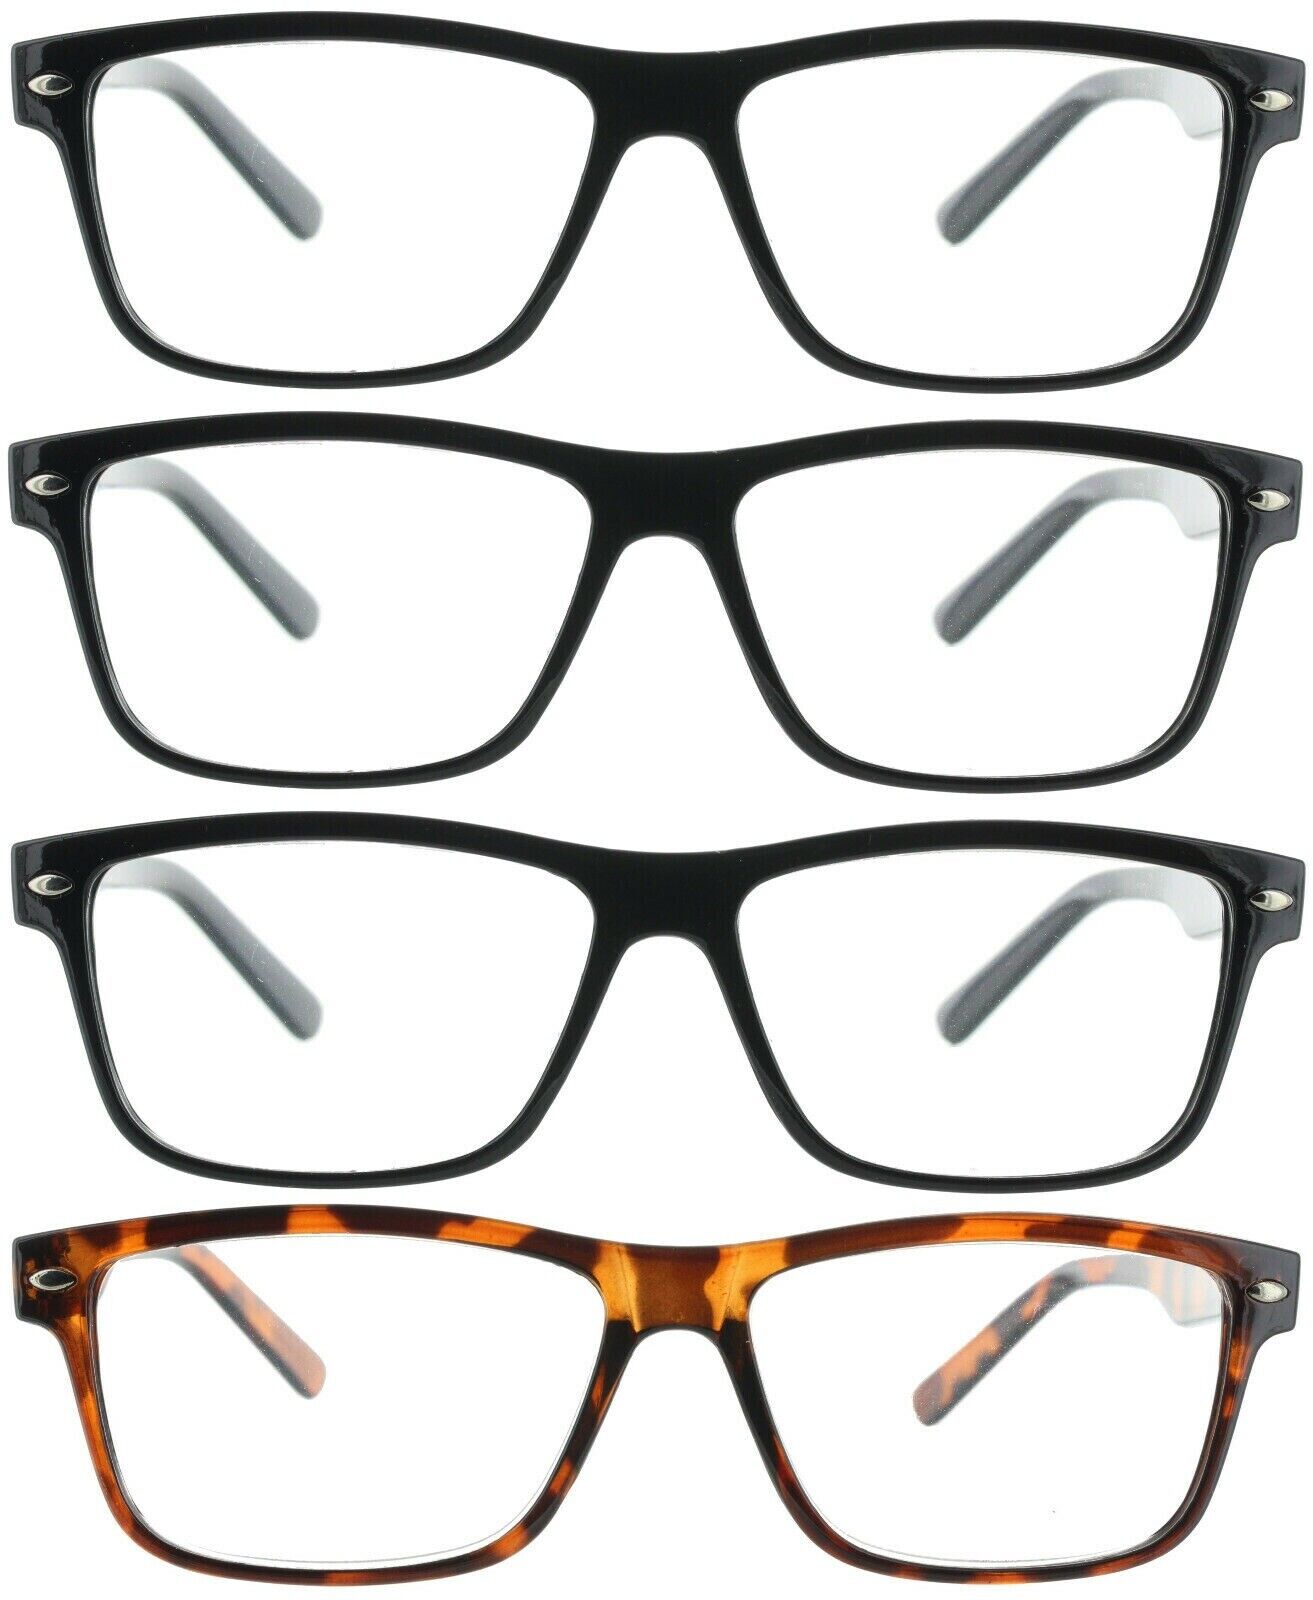 4 Pair Pack Reading Glasses Readers Men Women Square Classic Frame Unbranded Does Not Apply